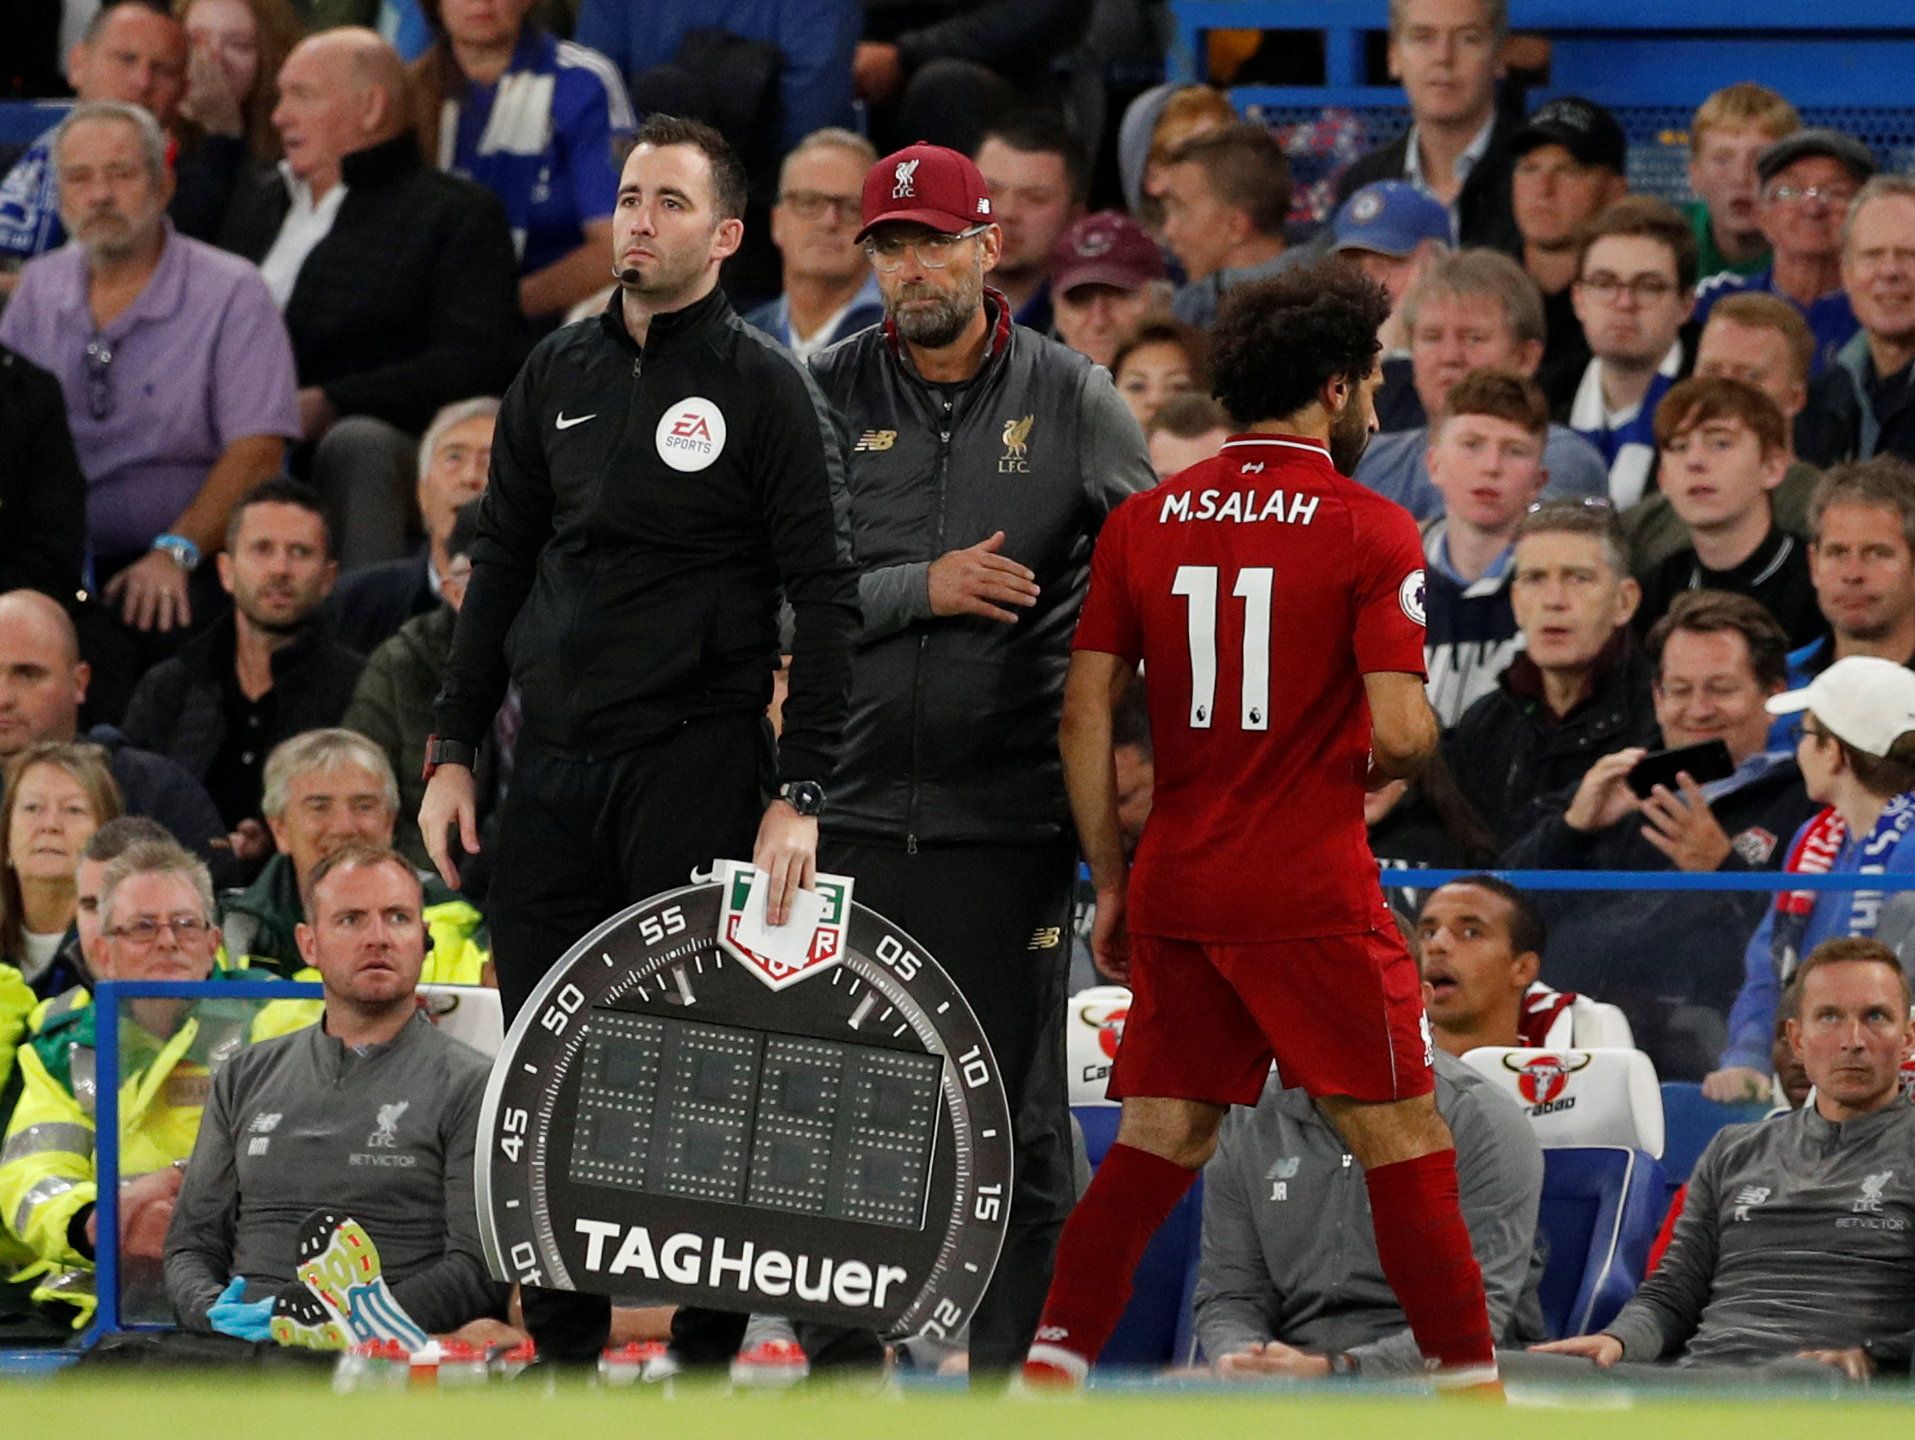 Mohamed Salah walks off the pitch after being substituted during Chelsea v Liverpool